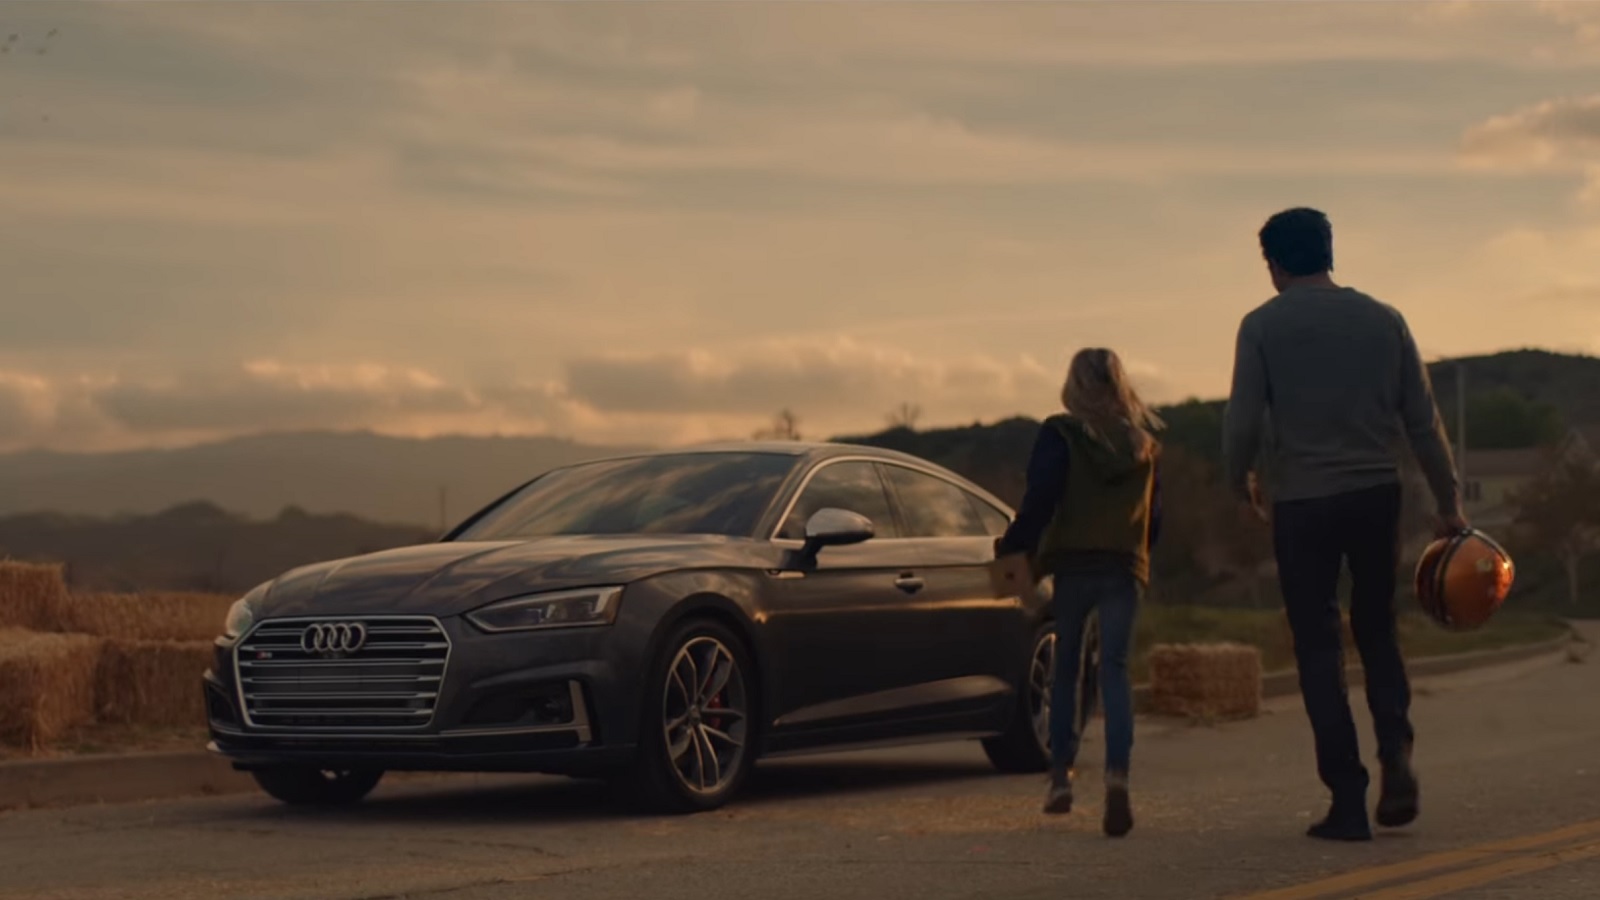 Audi Supports Women’s Pay Equality with New Super Bowl Ad